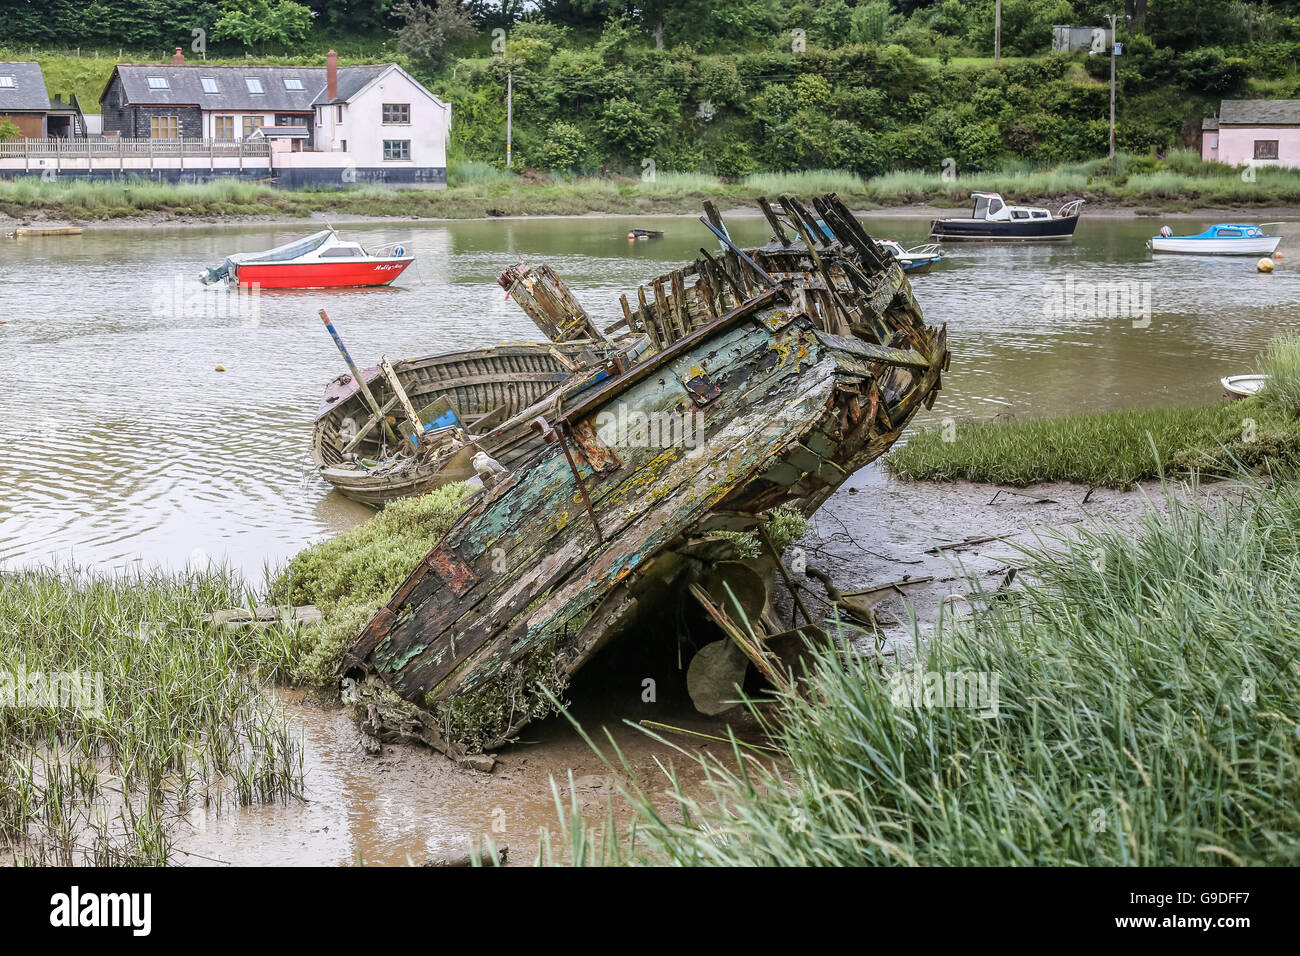 The hulk of an old timber ship lying on a coastal estuary. The vessel is rotting and covered in lichen and weeds Stock Photo